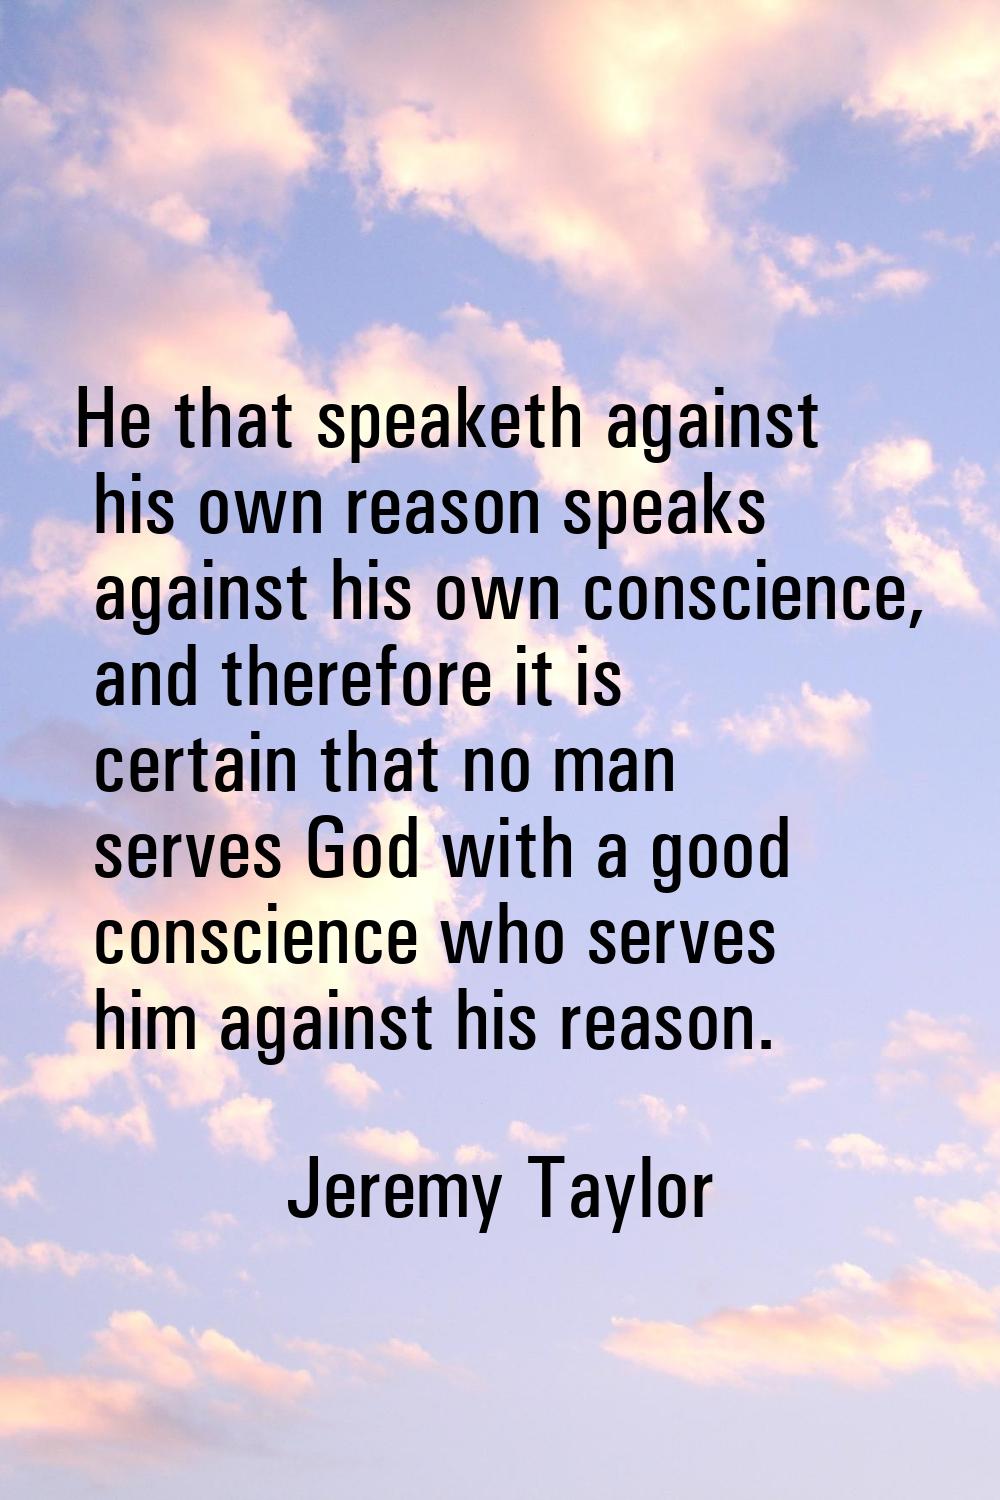 He that speaketh against his own reason speaks against his own conscience, and therefore it is cert